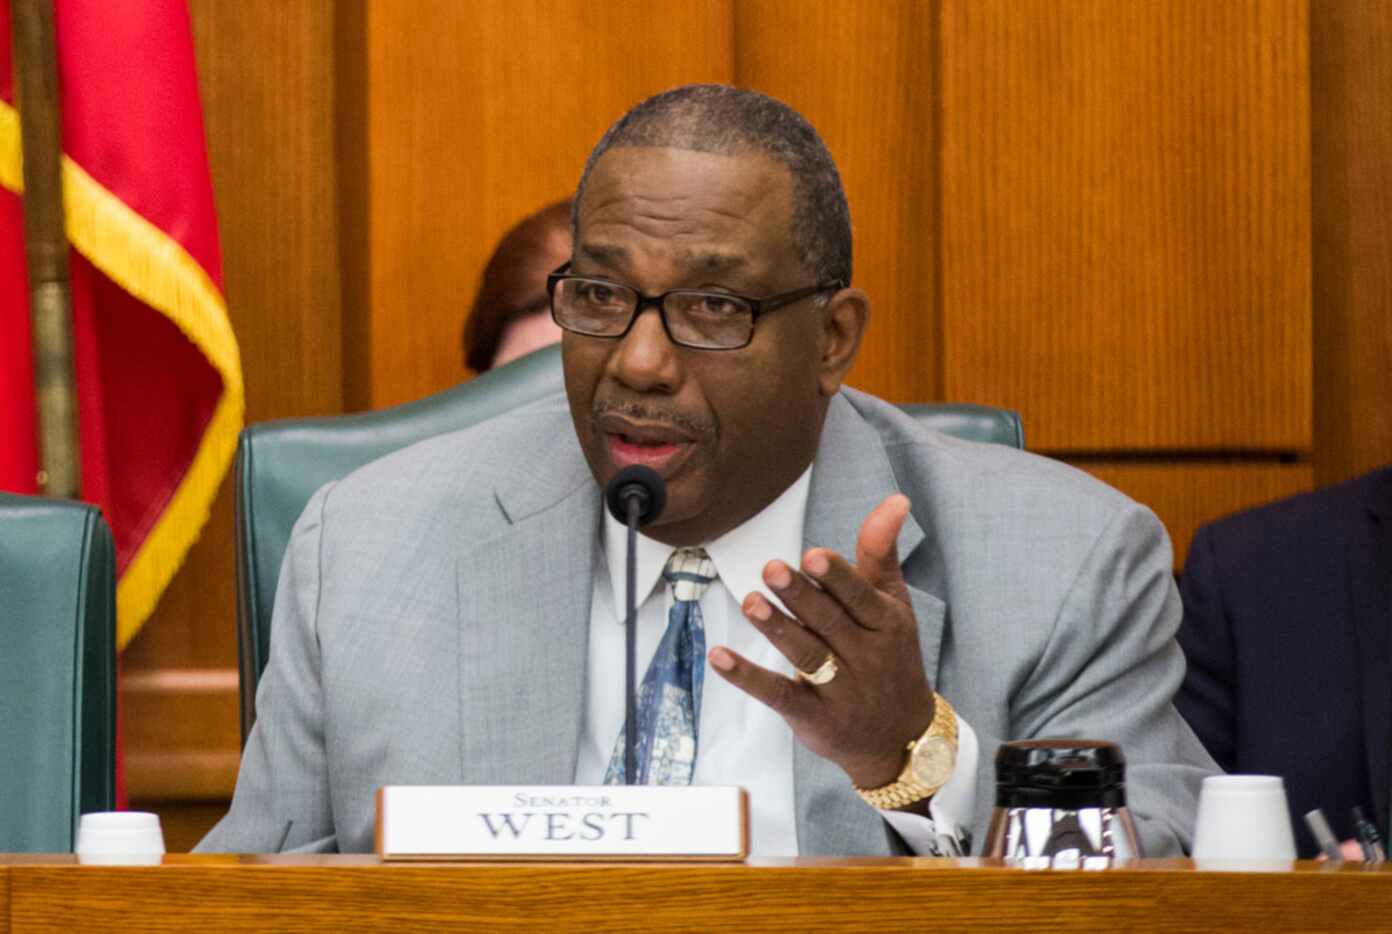 Sen. Royce West, D-Dallas, witnessed a harrowing electric scooter crash in Austin and now is...